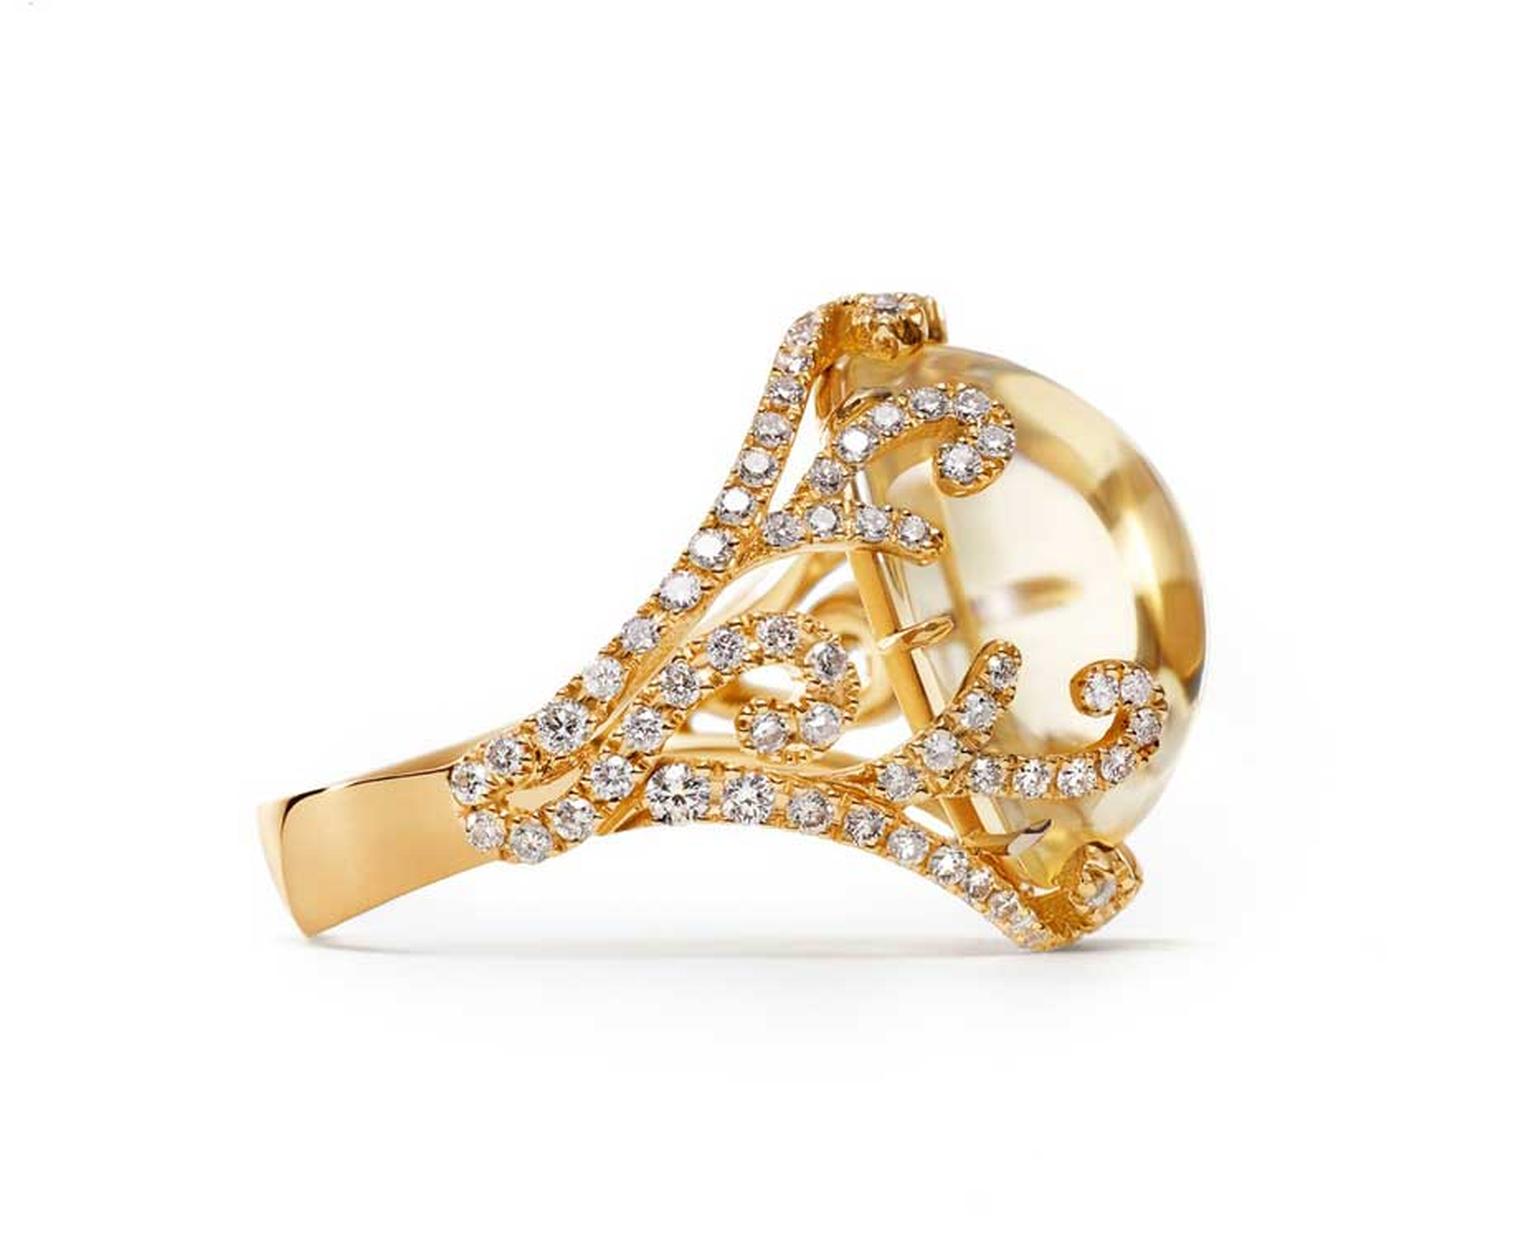 Sarah Ho for William & Son citrine cocktail ring in rose gold